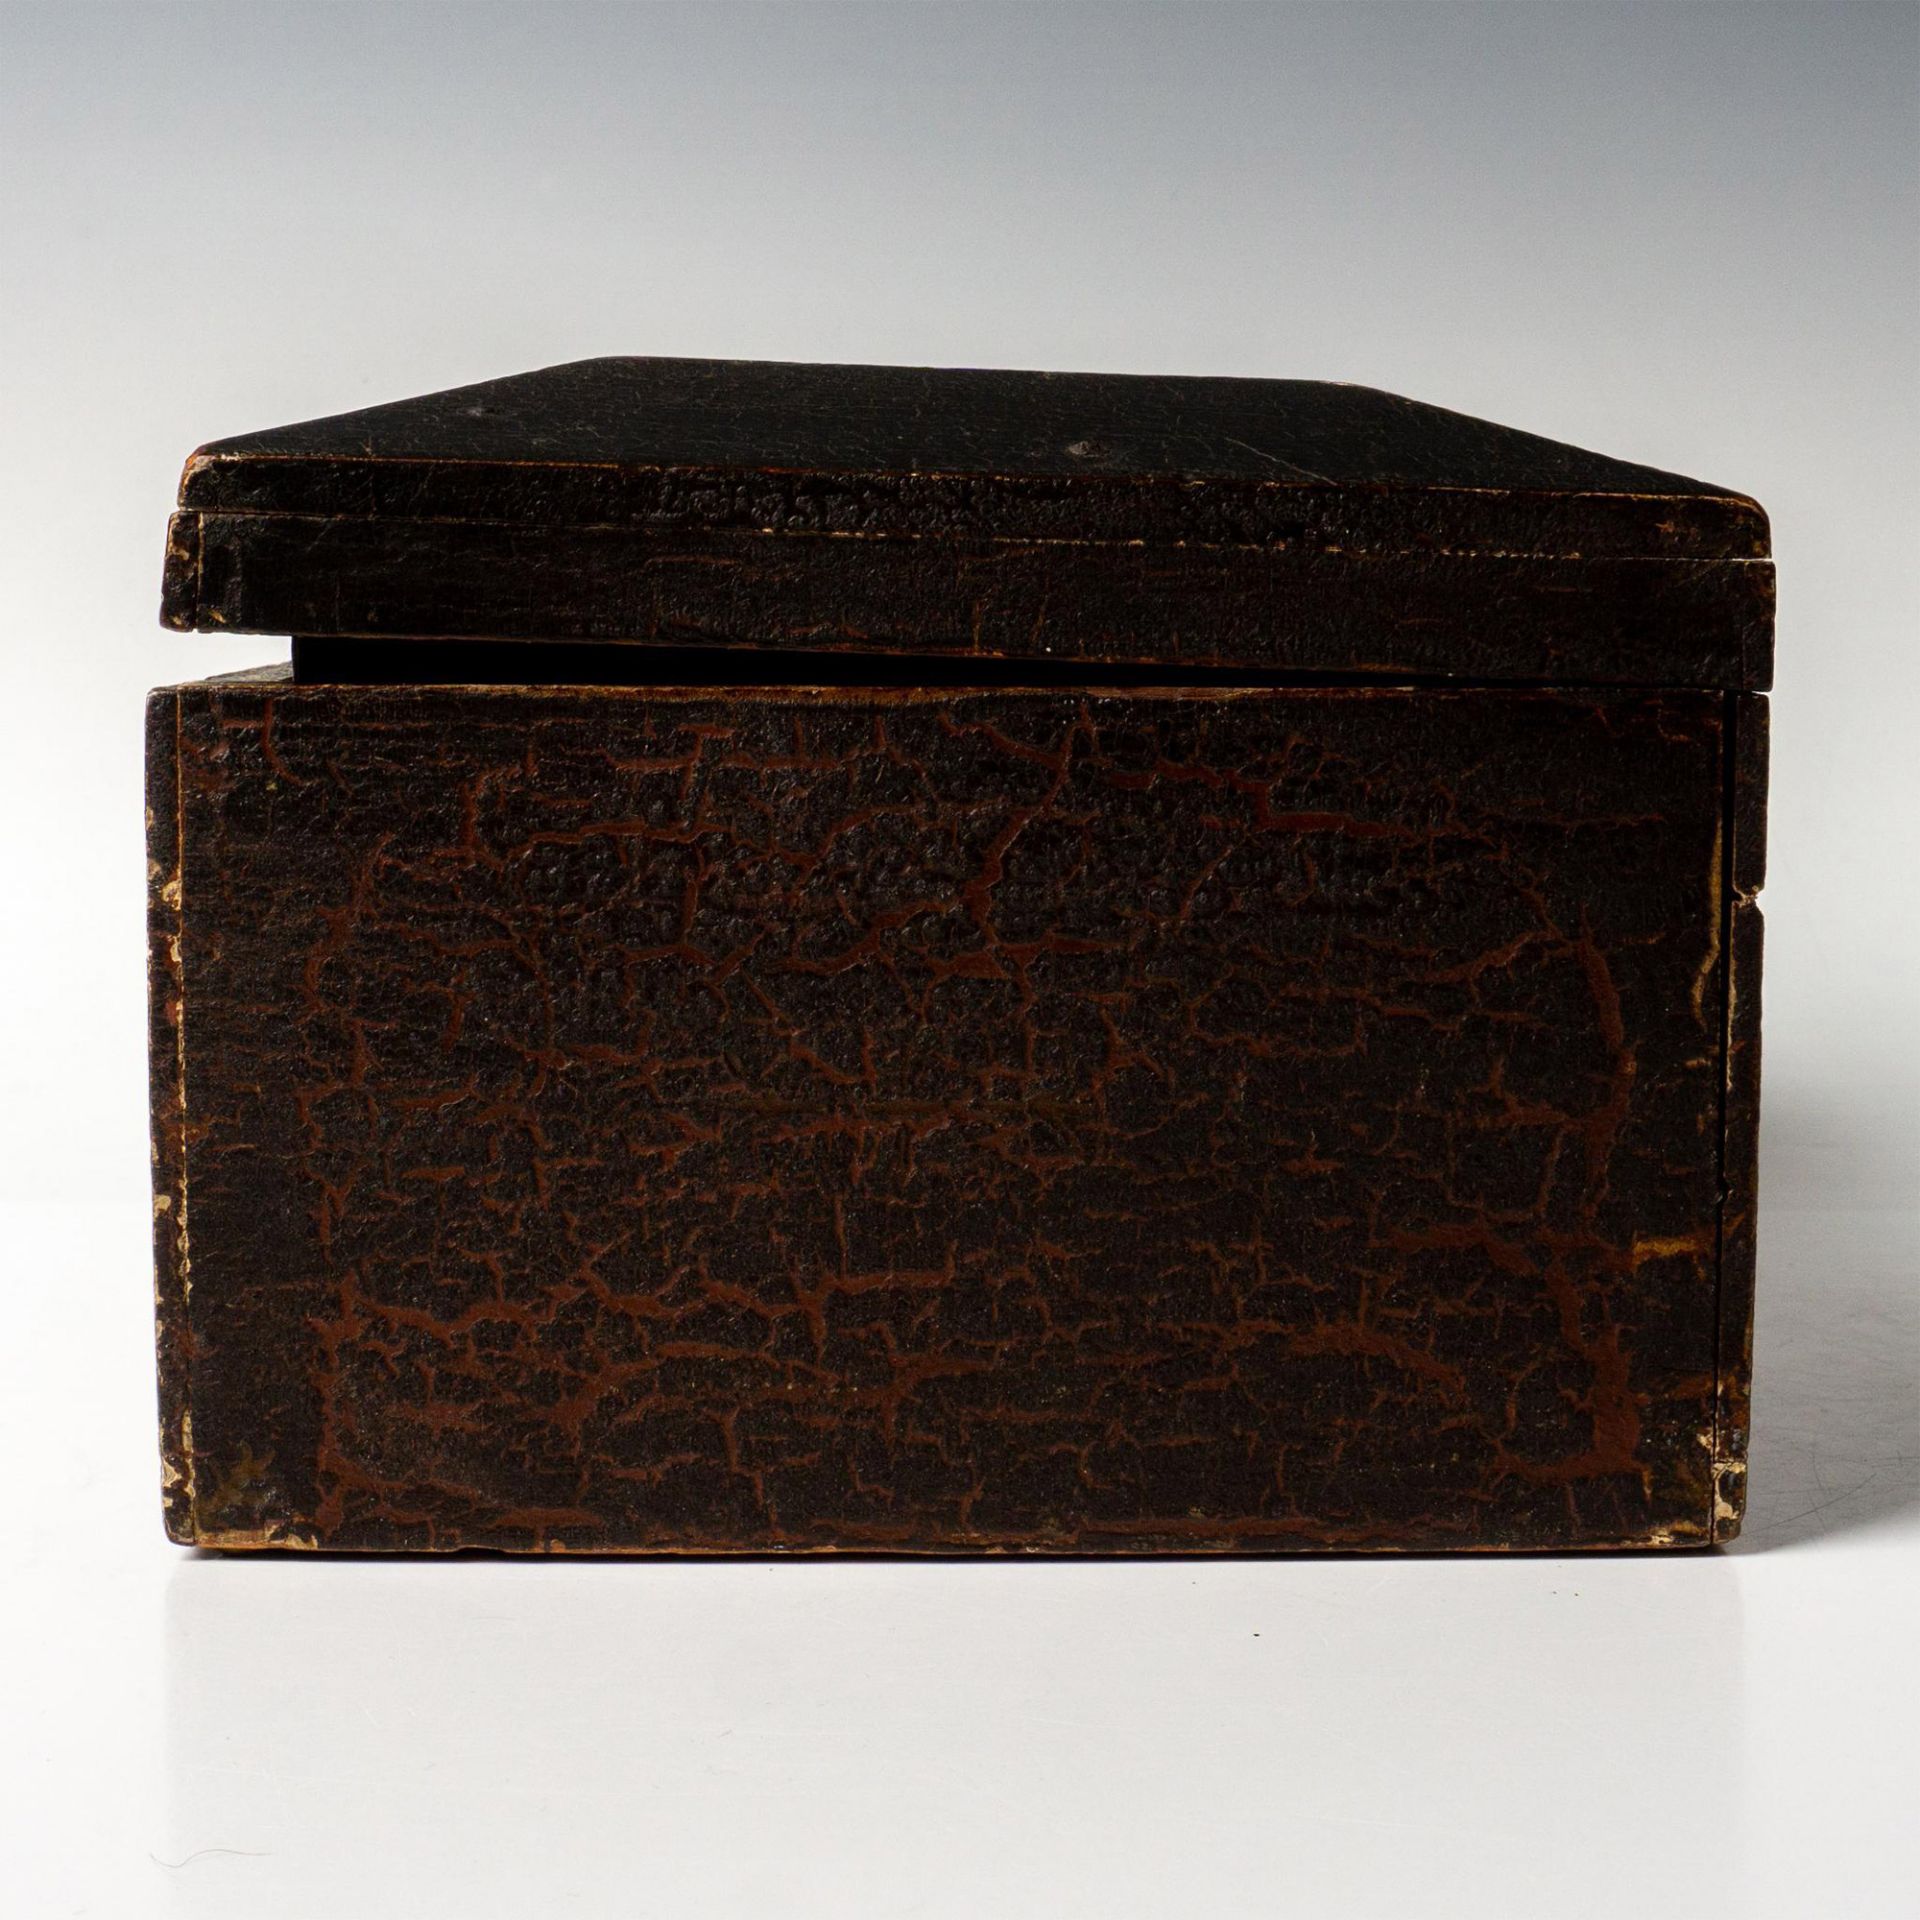 Antique Handmade Wooden Jewelry Box, Engraved Anna - Image 3 of 6